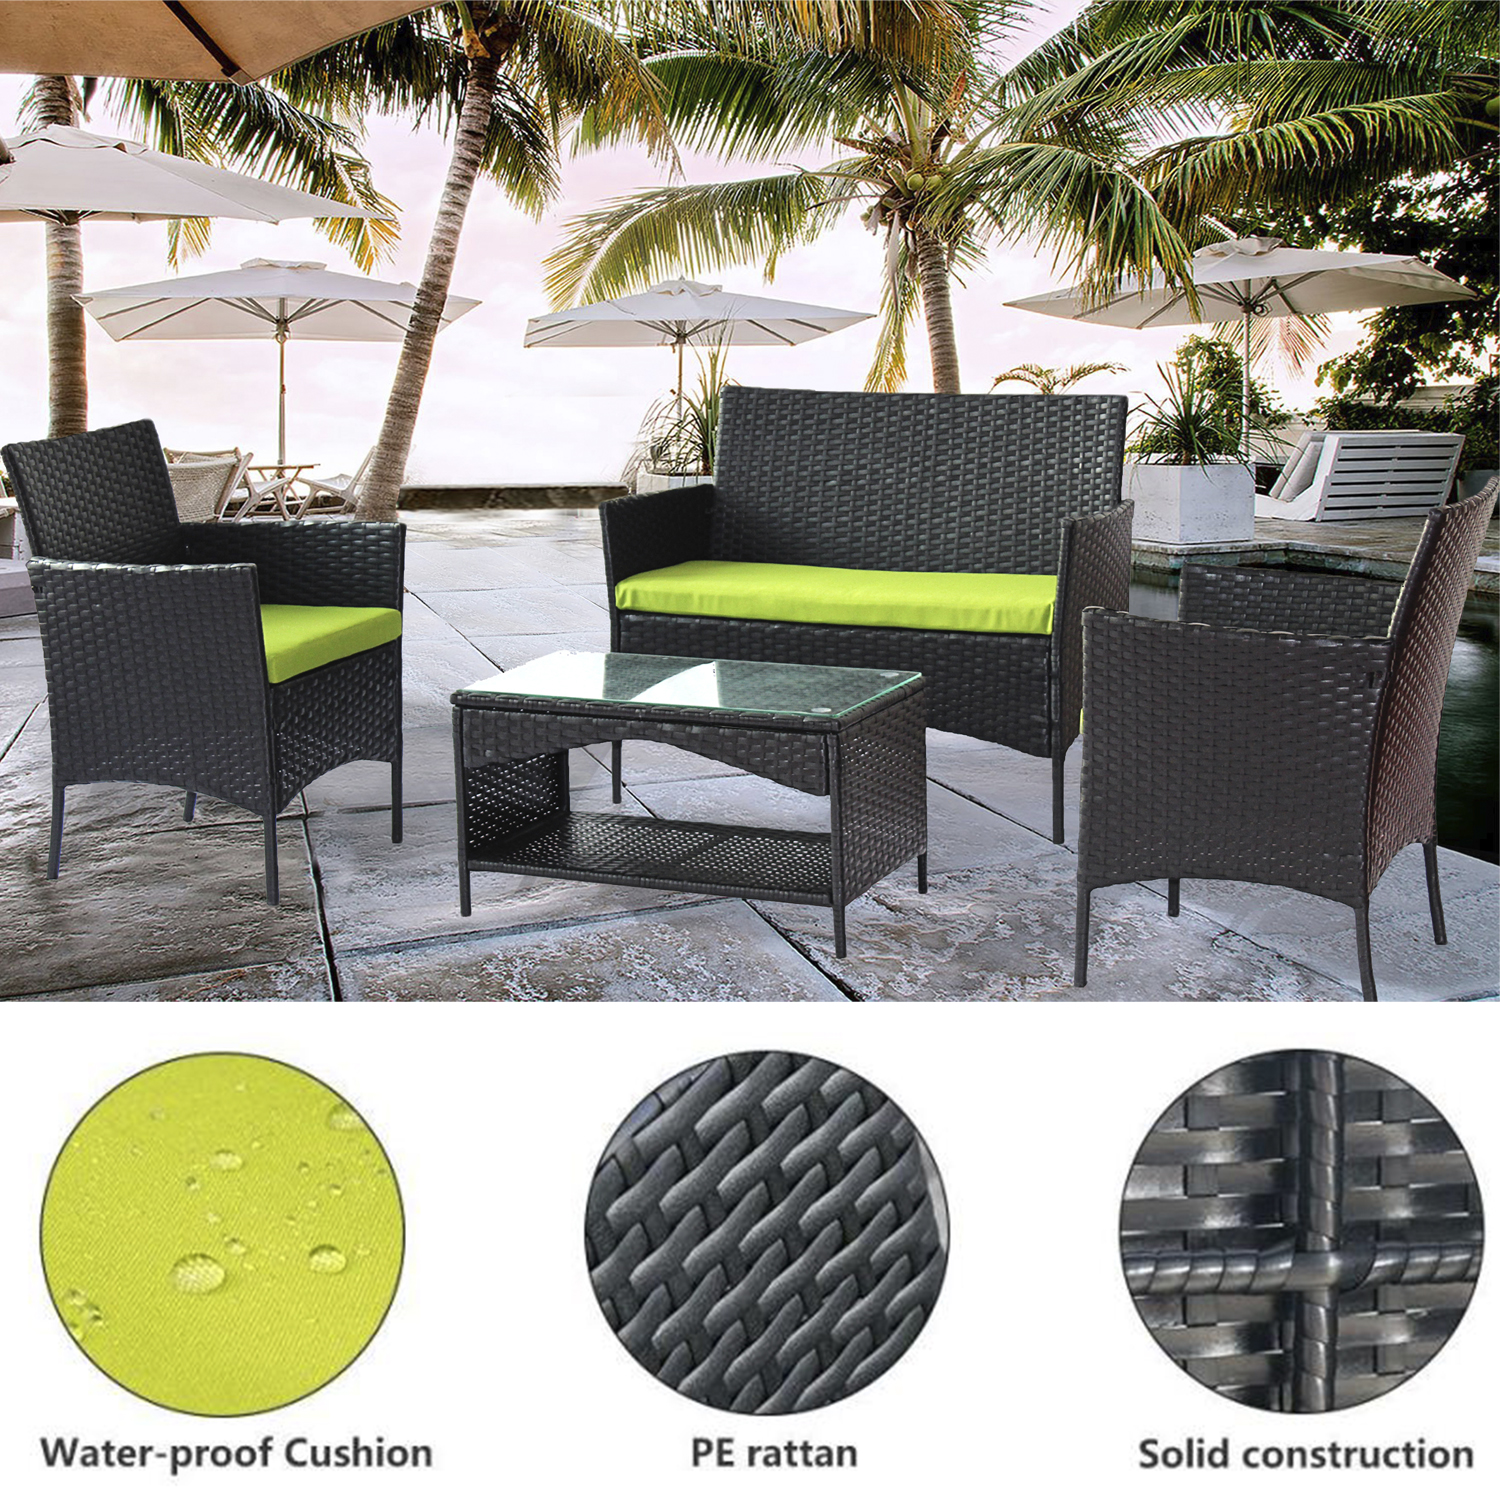 Uhomepro 4 Piece Bistro Patio Set, Rattan Wicker Outdoor Patio Furniture with 2pcs Arm Chairs, 1pc Love Seat, Coffee Table, Green Cushion, Dining for Backyard Poolside Garden - image 4 of 8